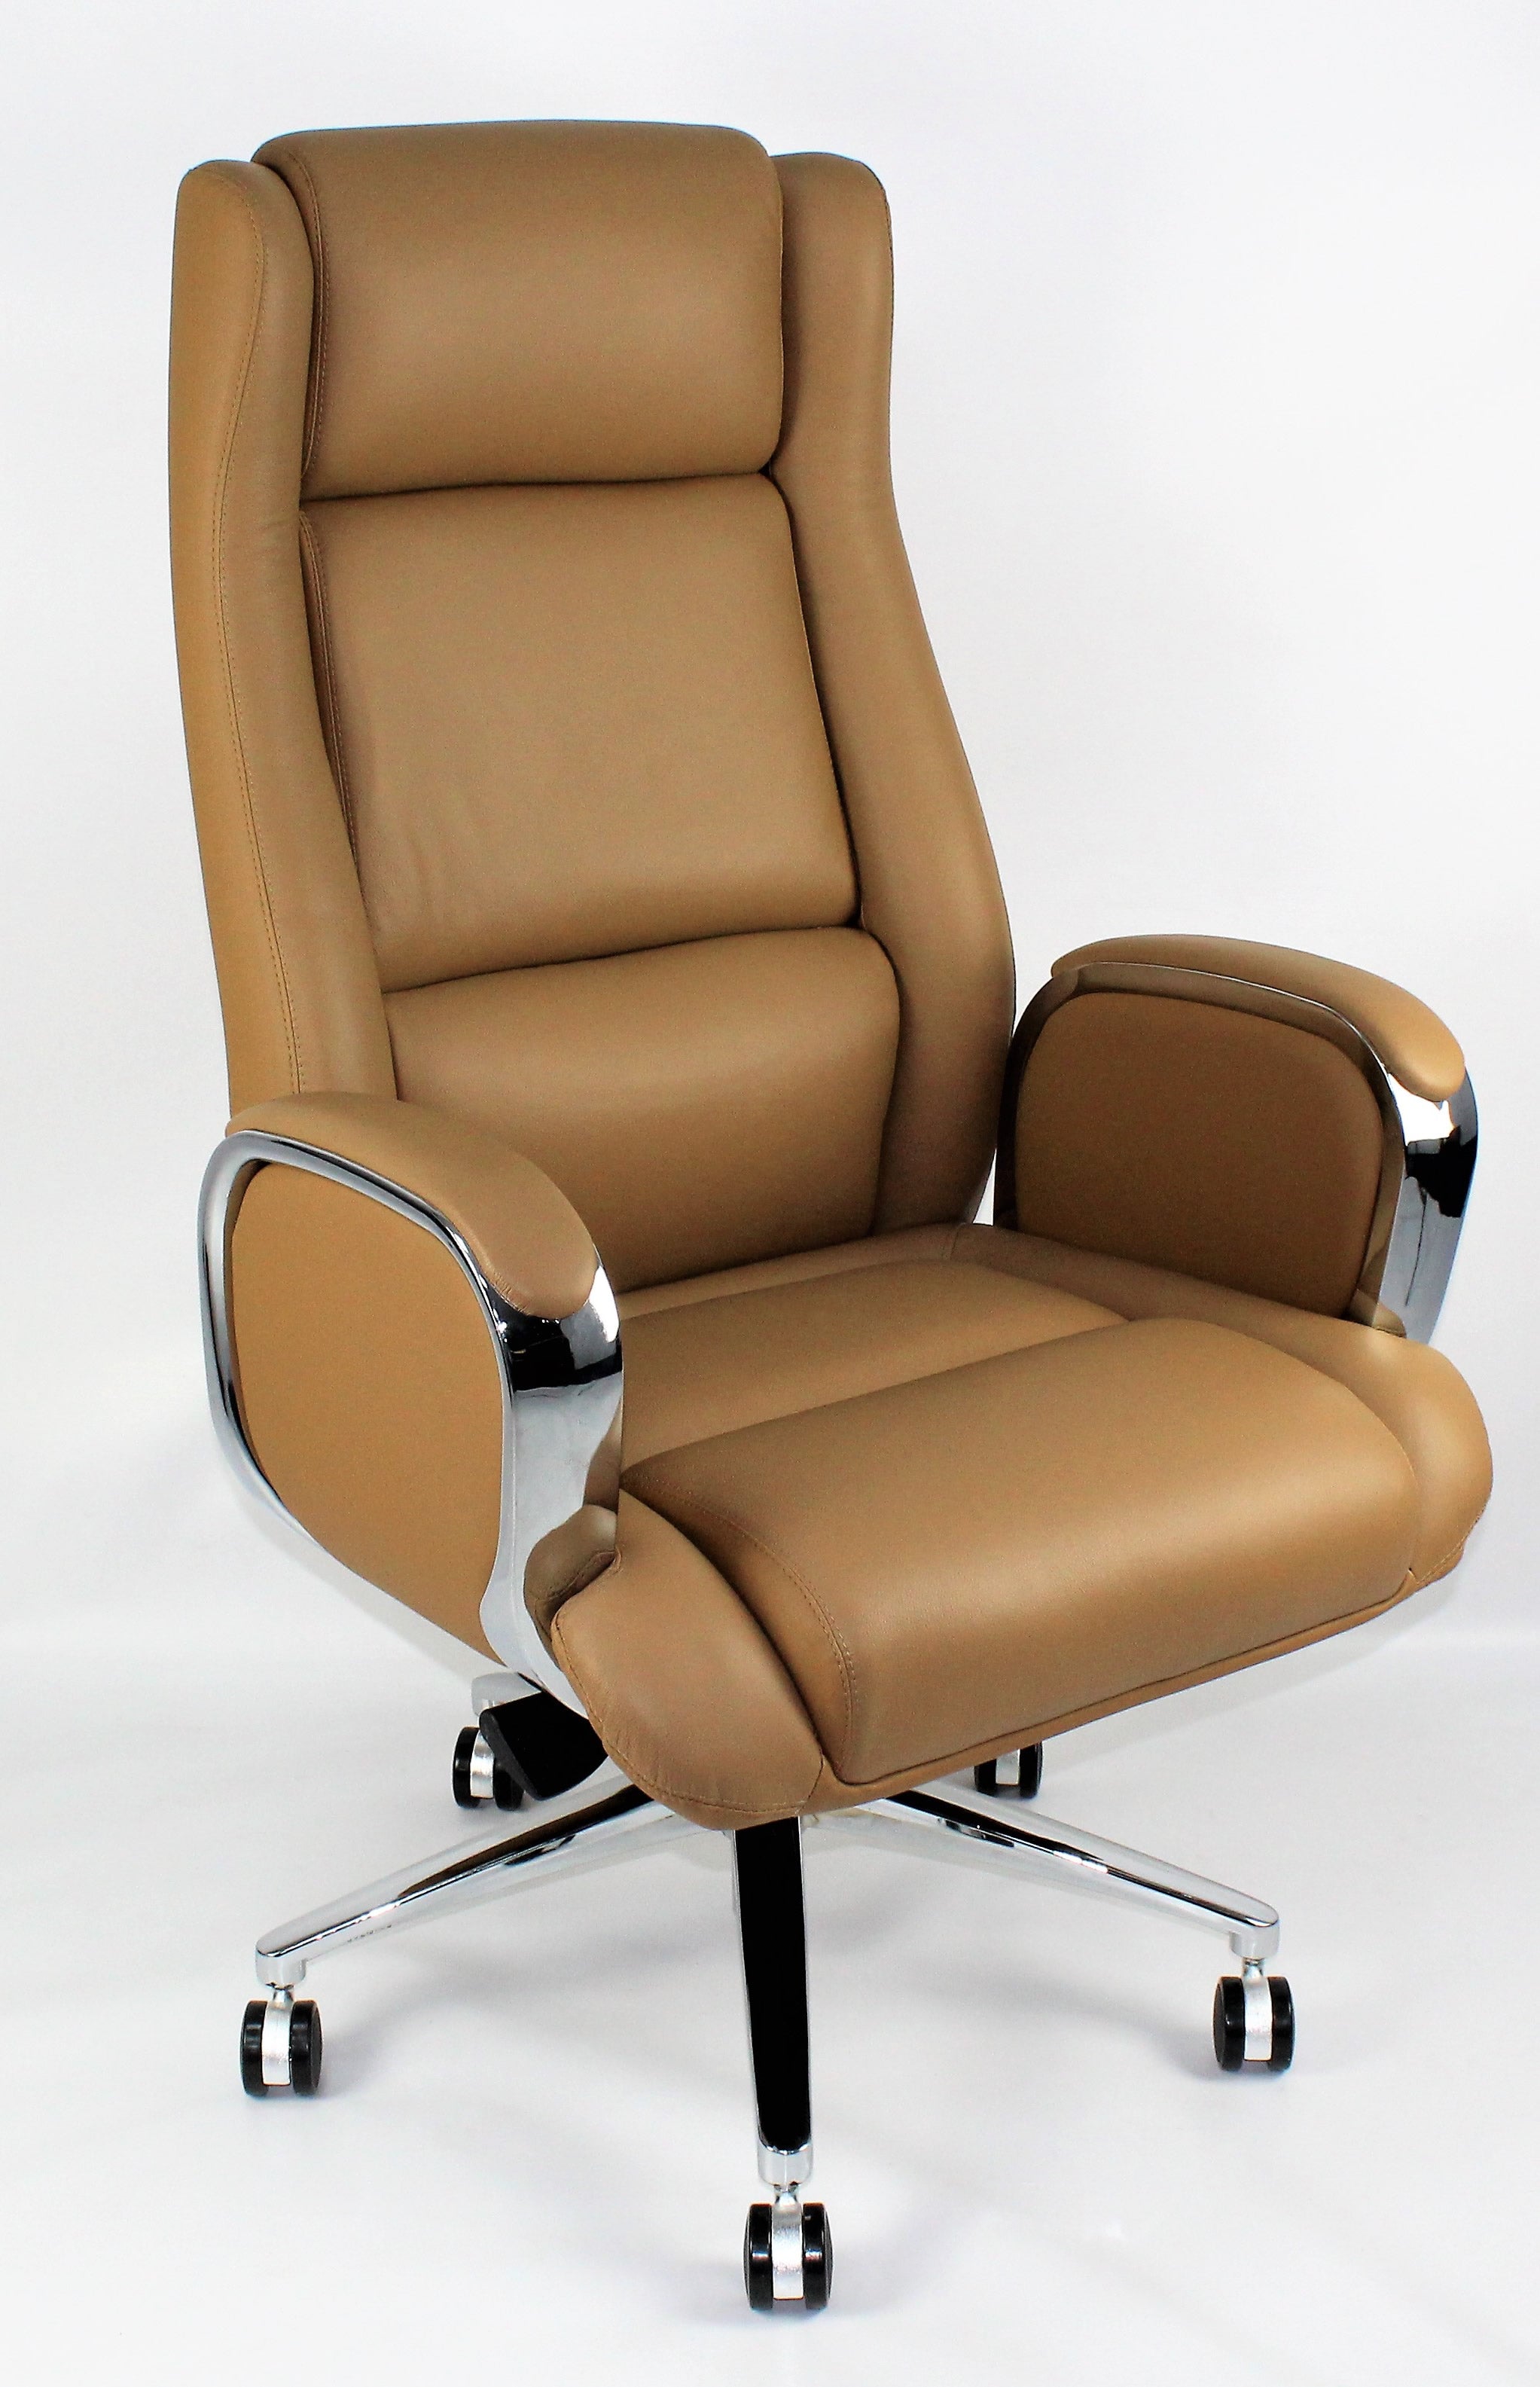 Beige Leather Executive Office Chair with Chrome Trimmed Arms - J1201 UK